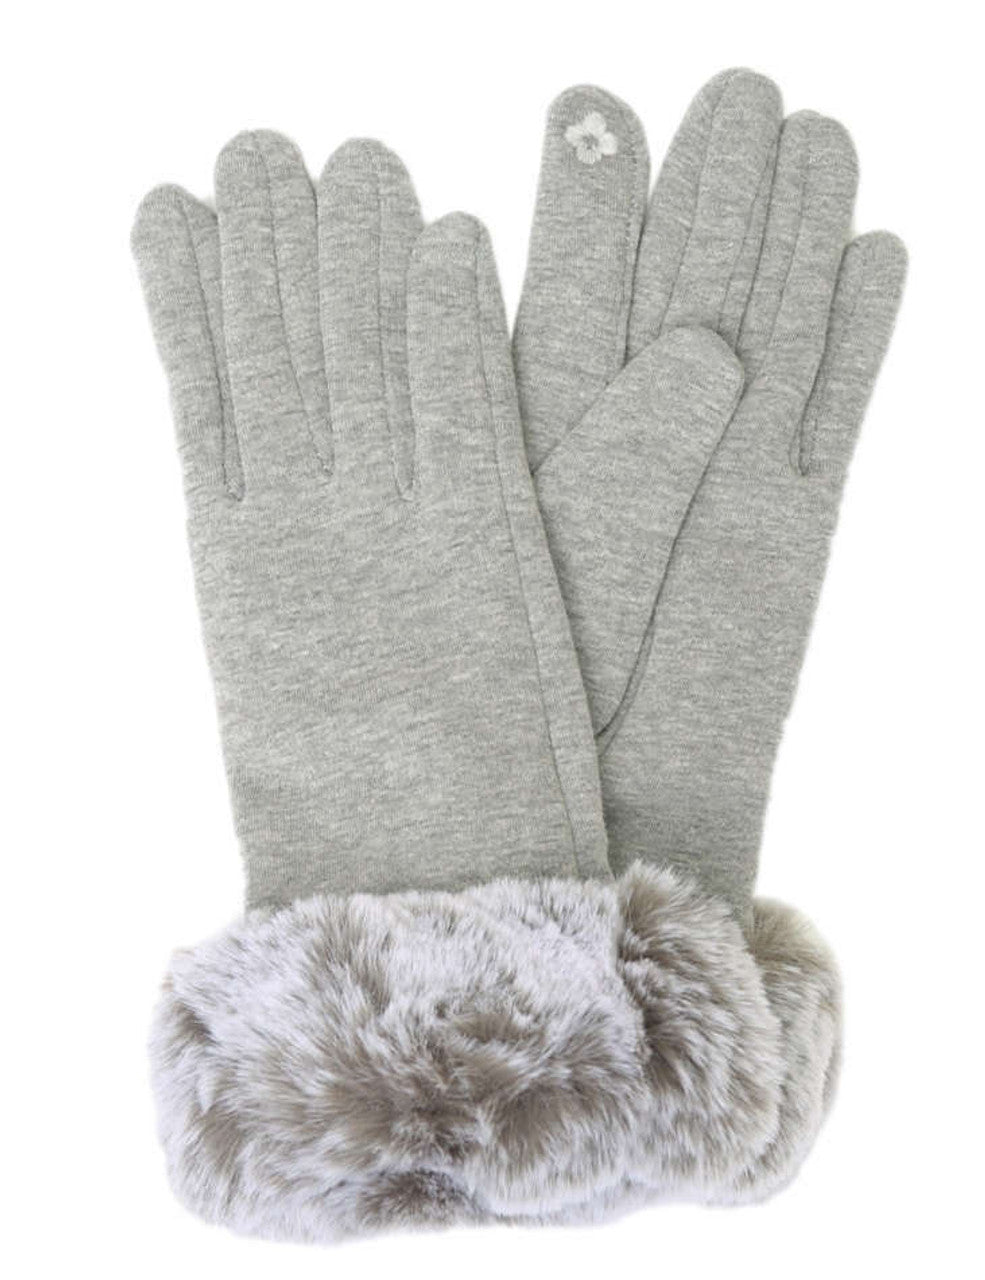 Faux Fur Cuff Gloves (Only 1 Pair Left!)